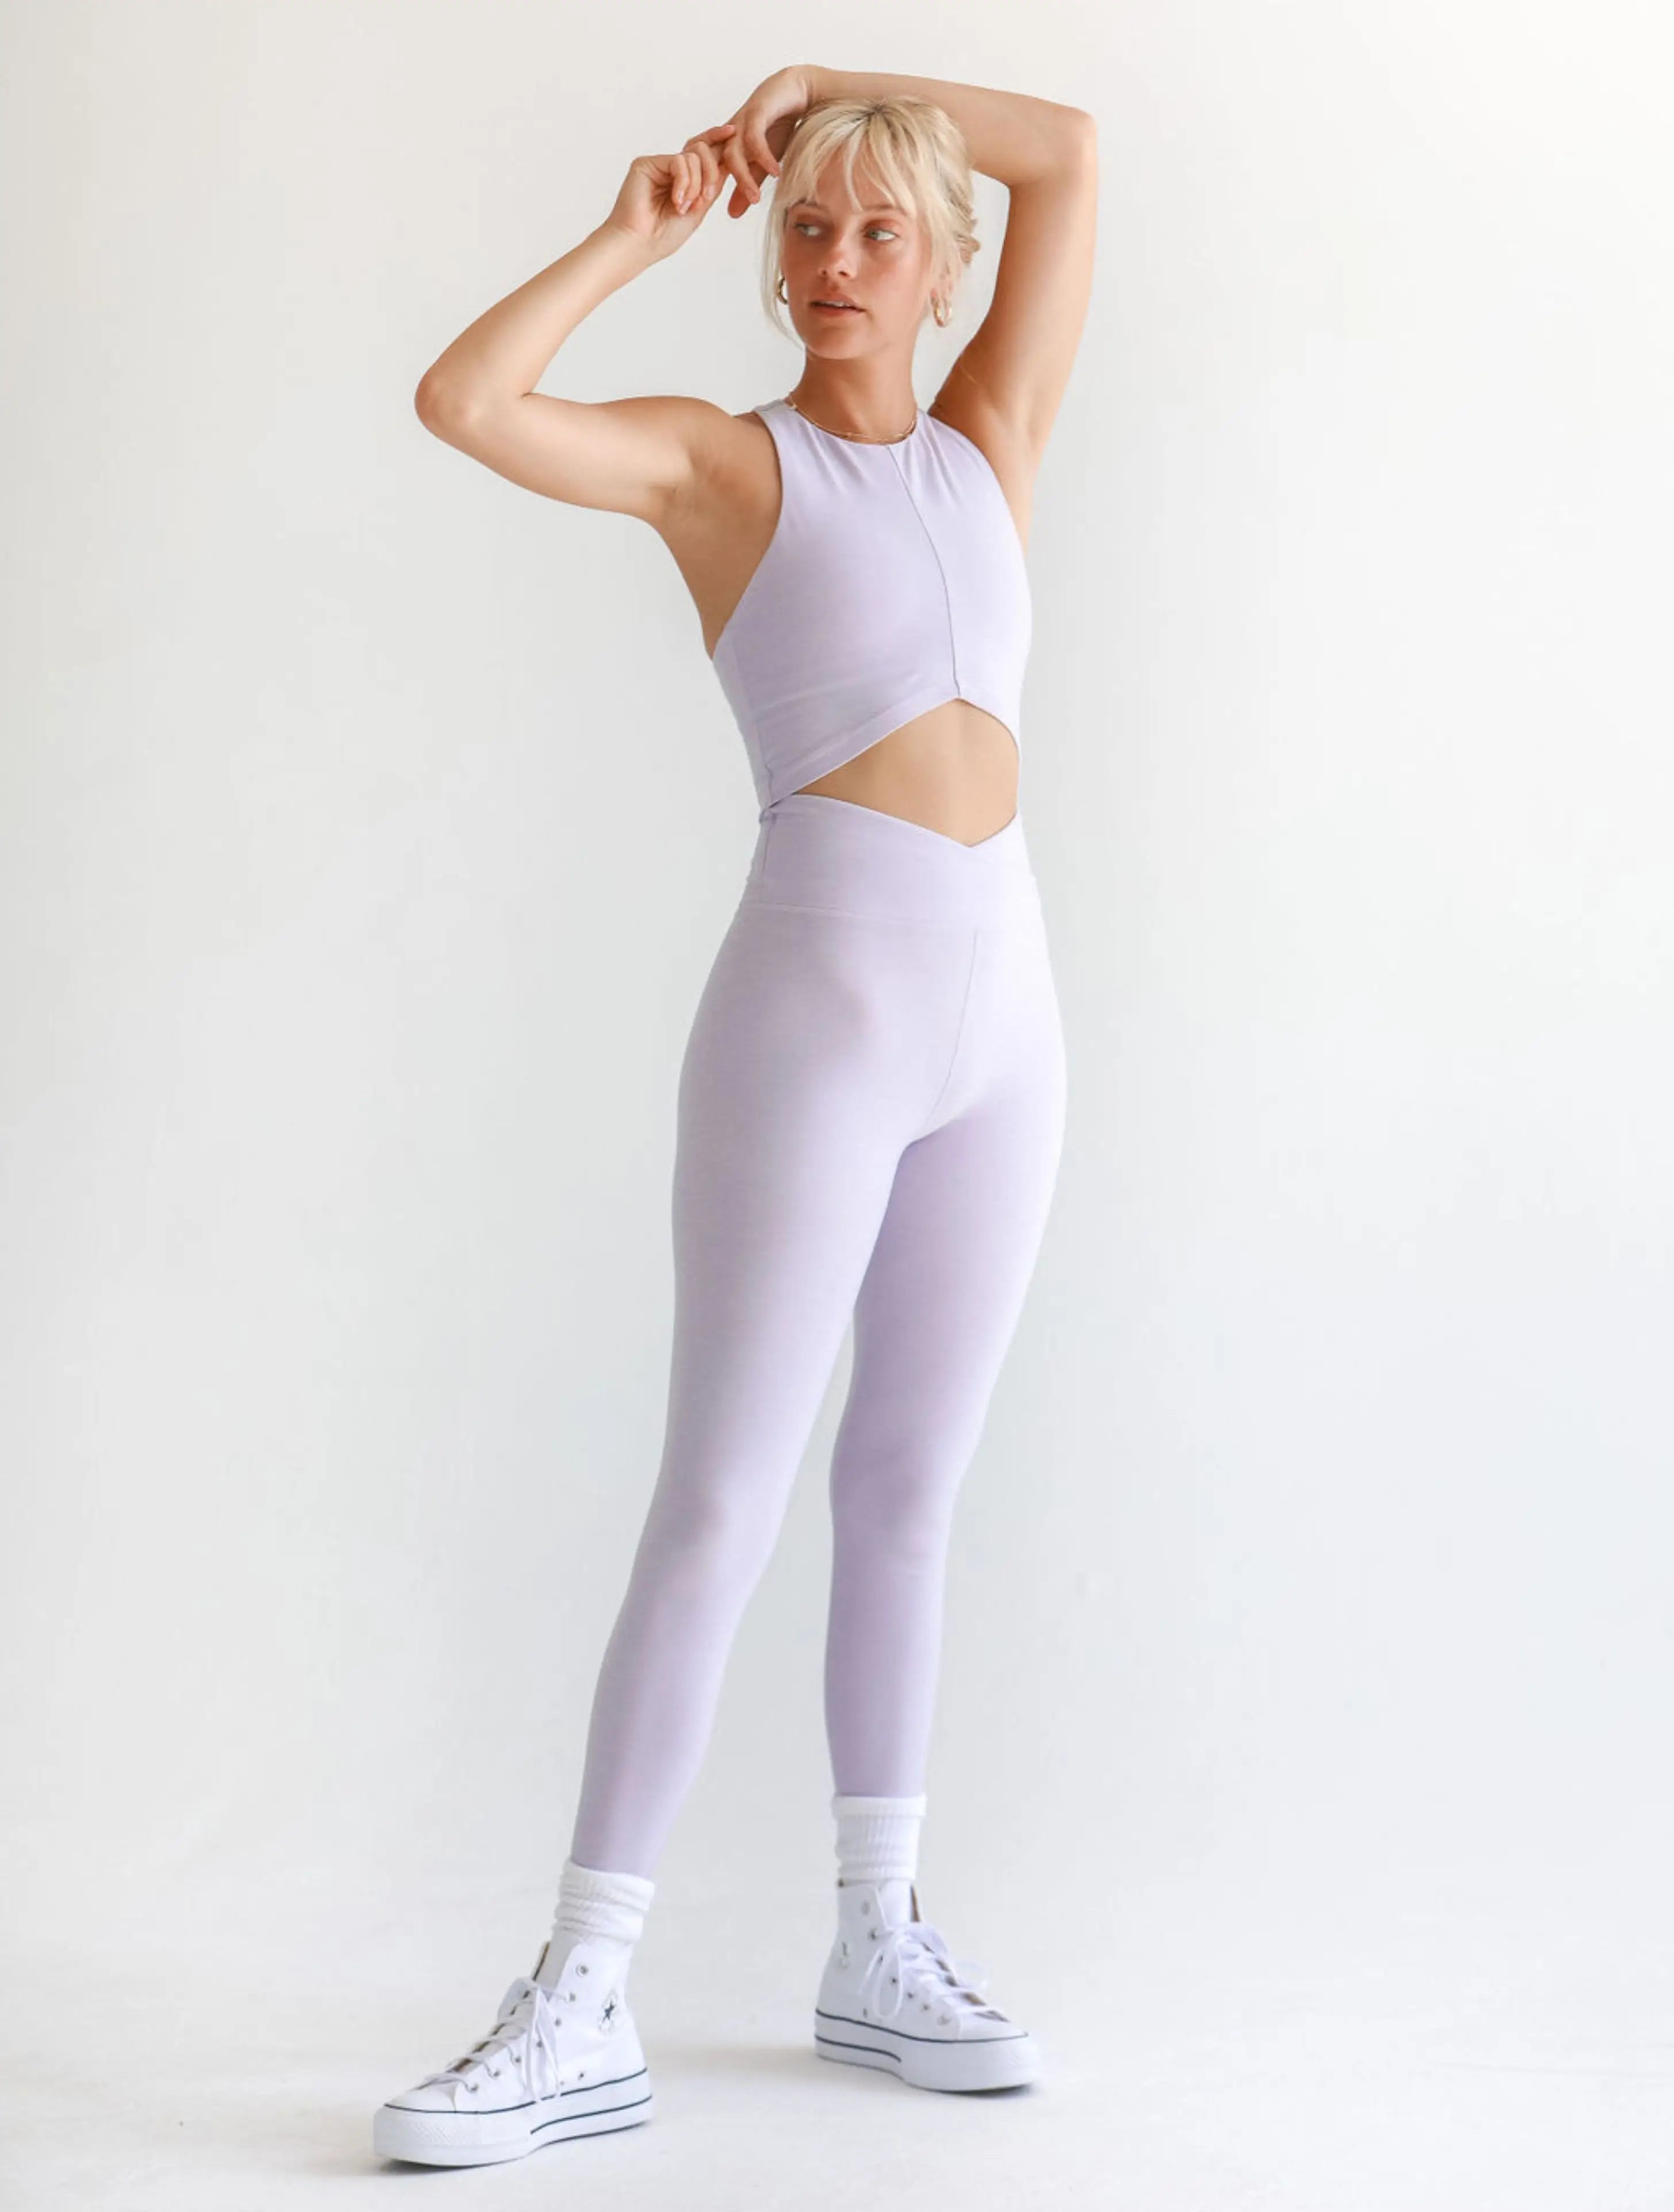 Curate - Athleisure - Sustainable & Ethical Activewear & Loungewear